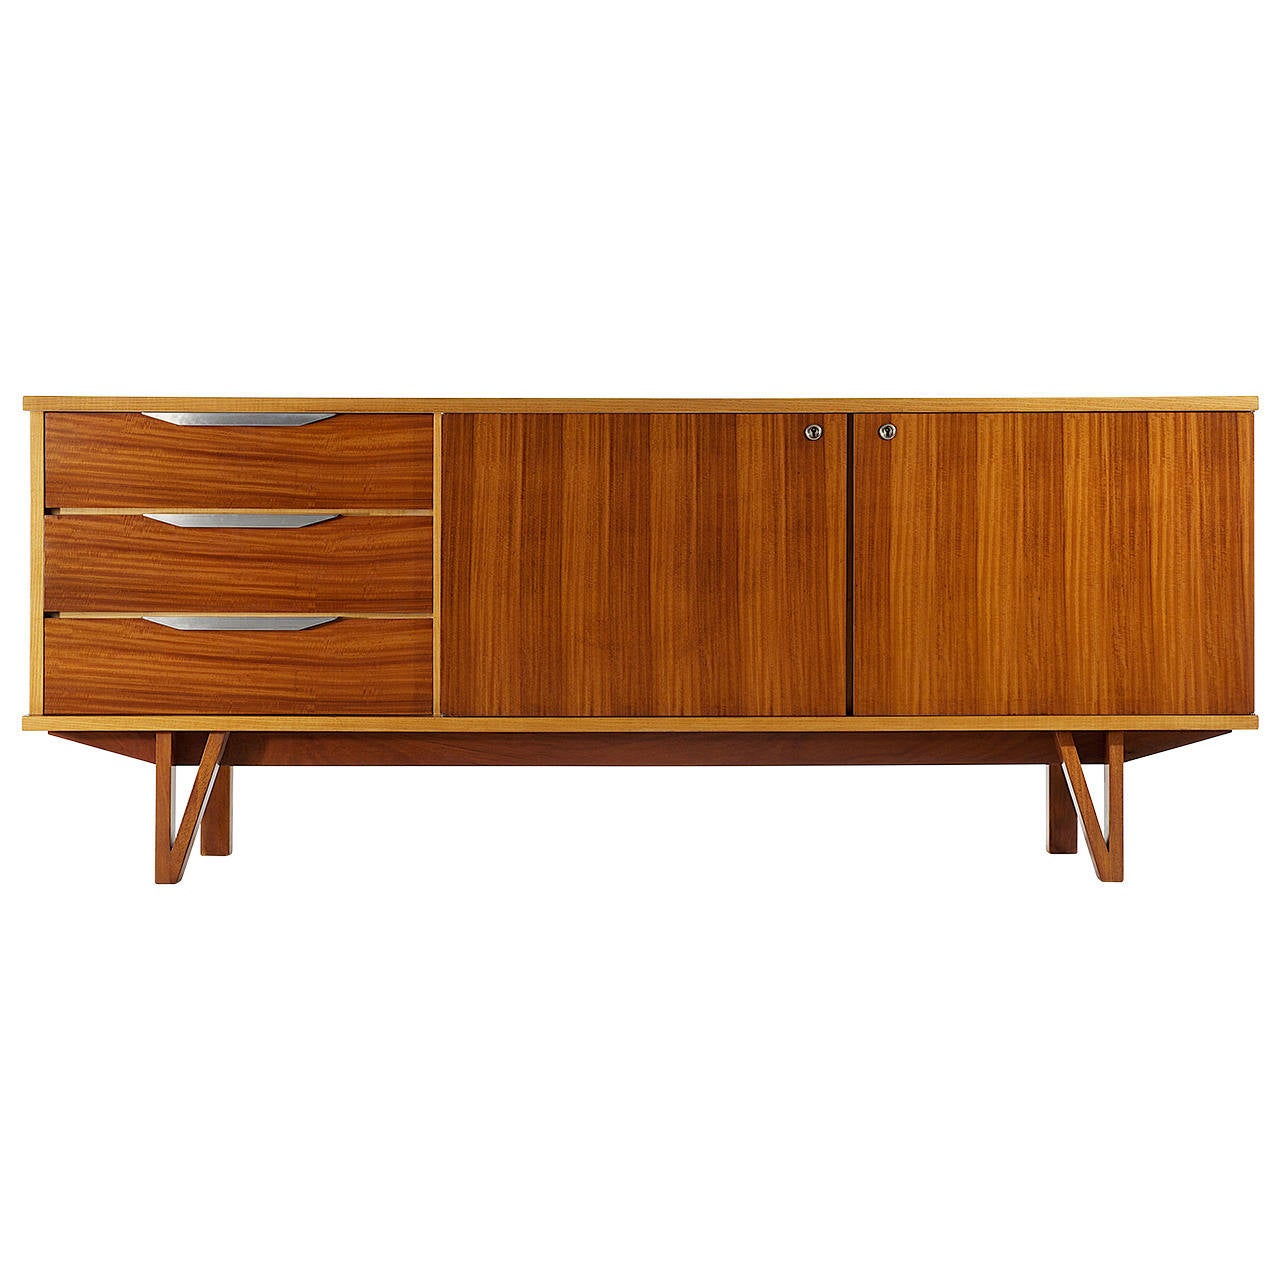 1957 Credenza by René Jean Caillette